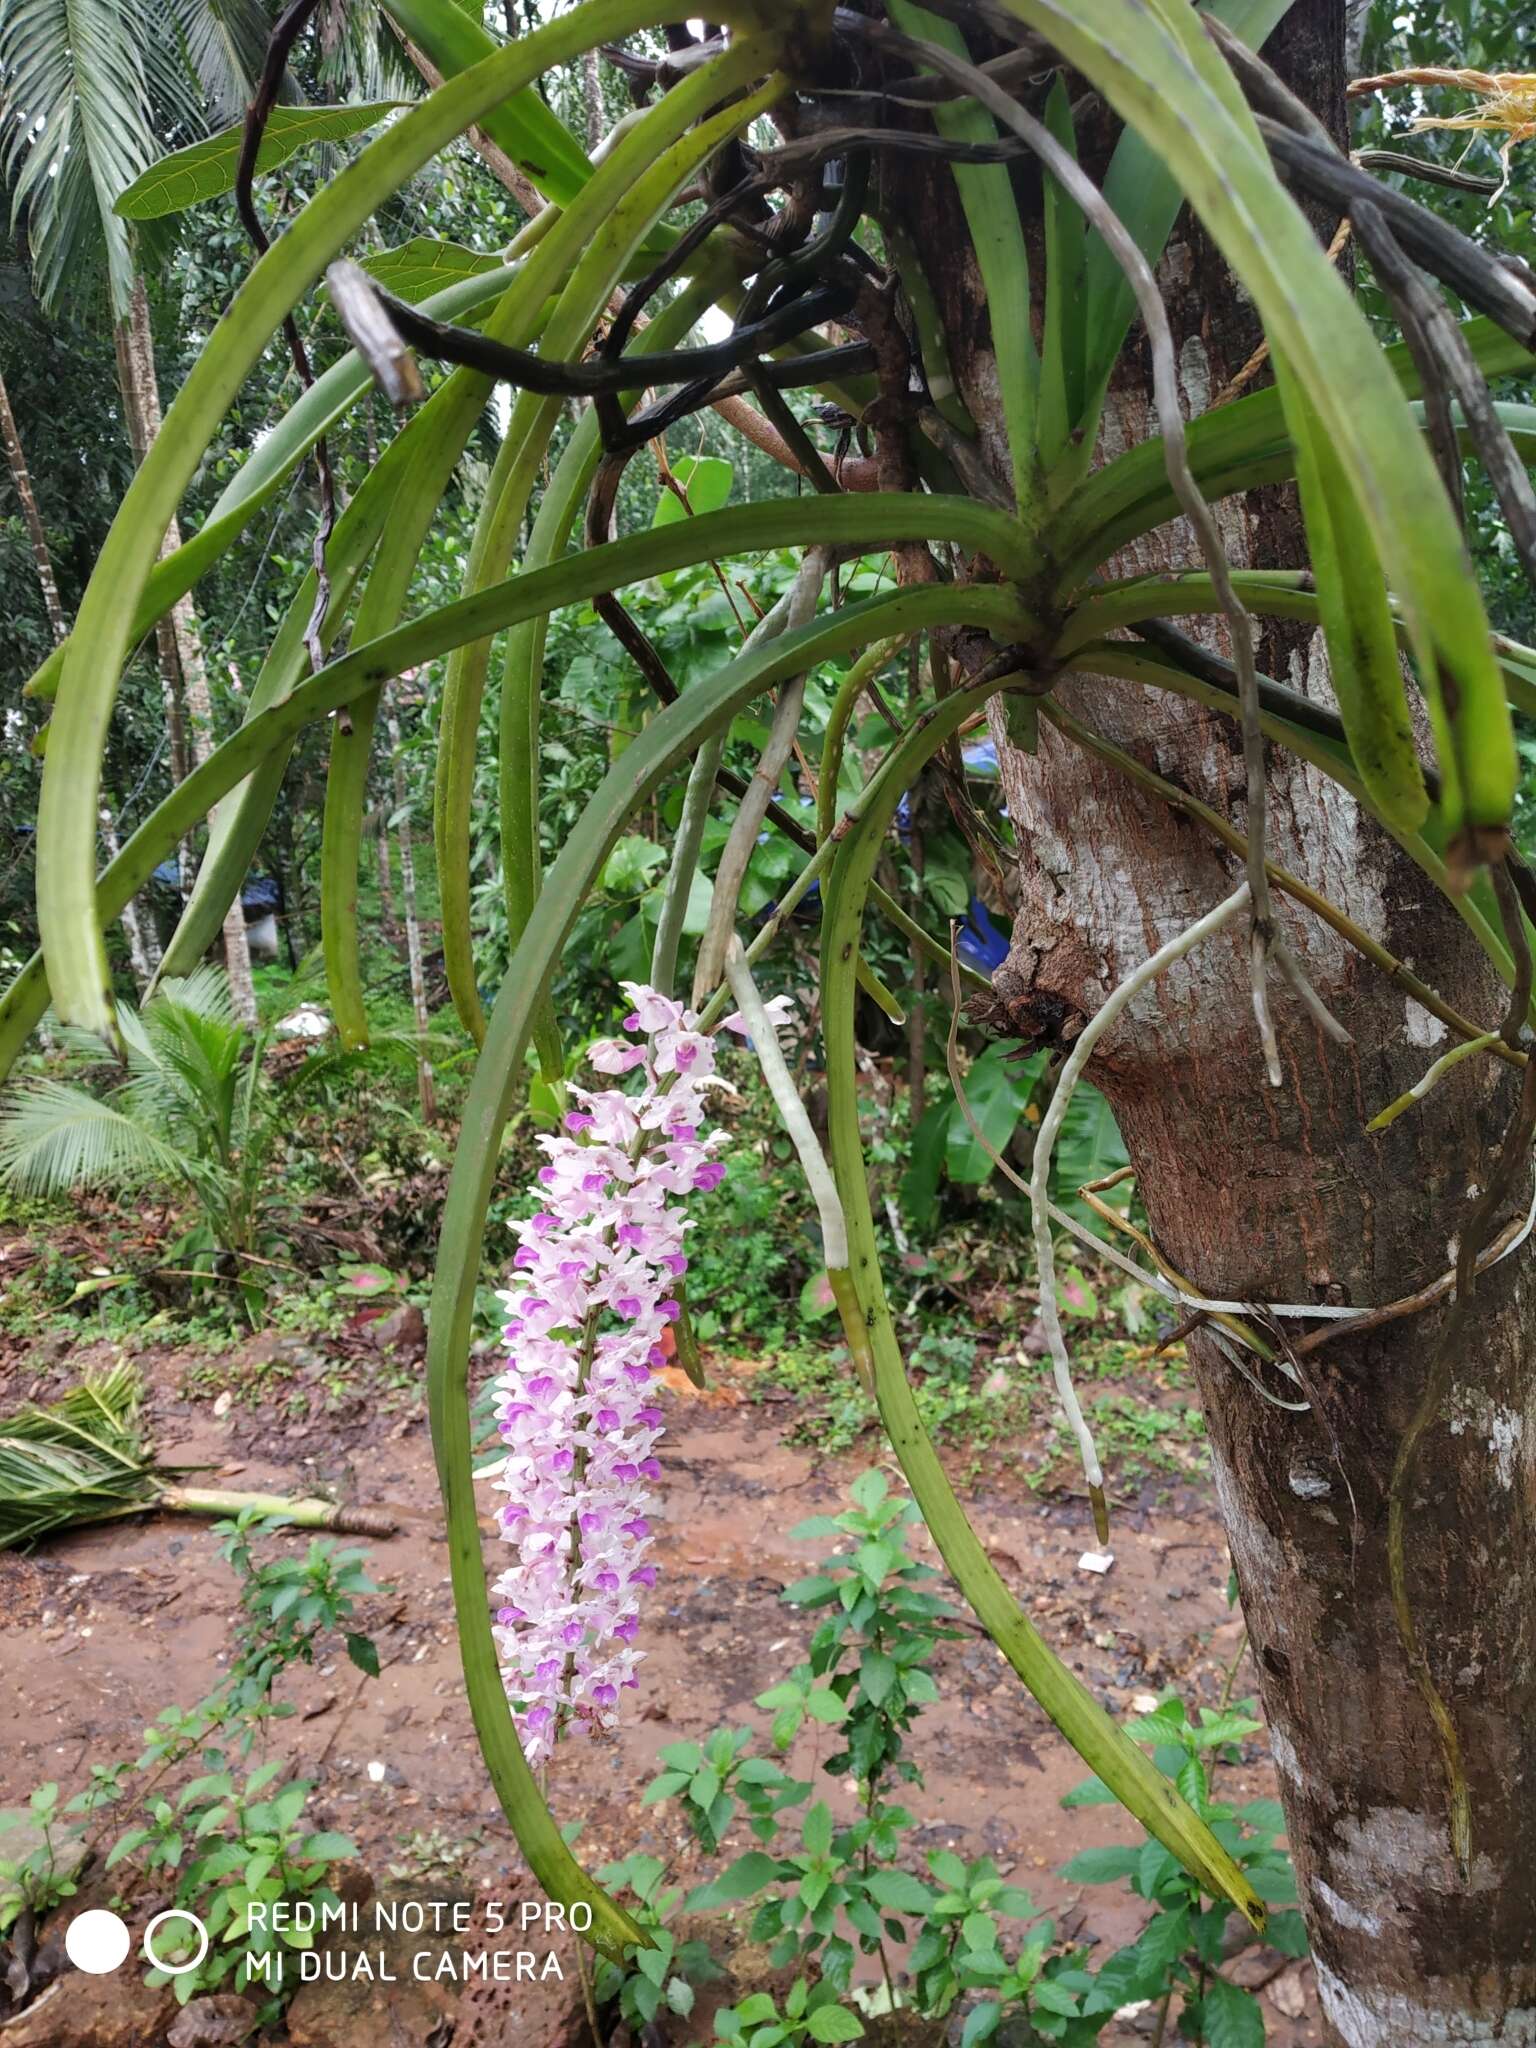 Image of Foxtail orchid